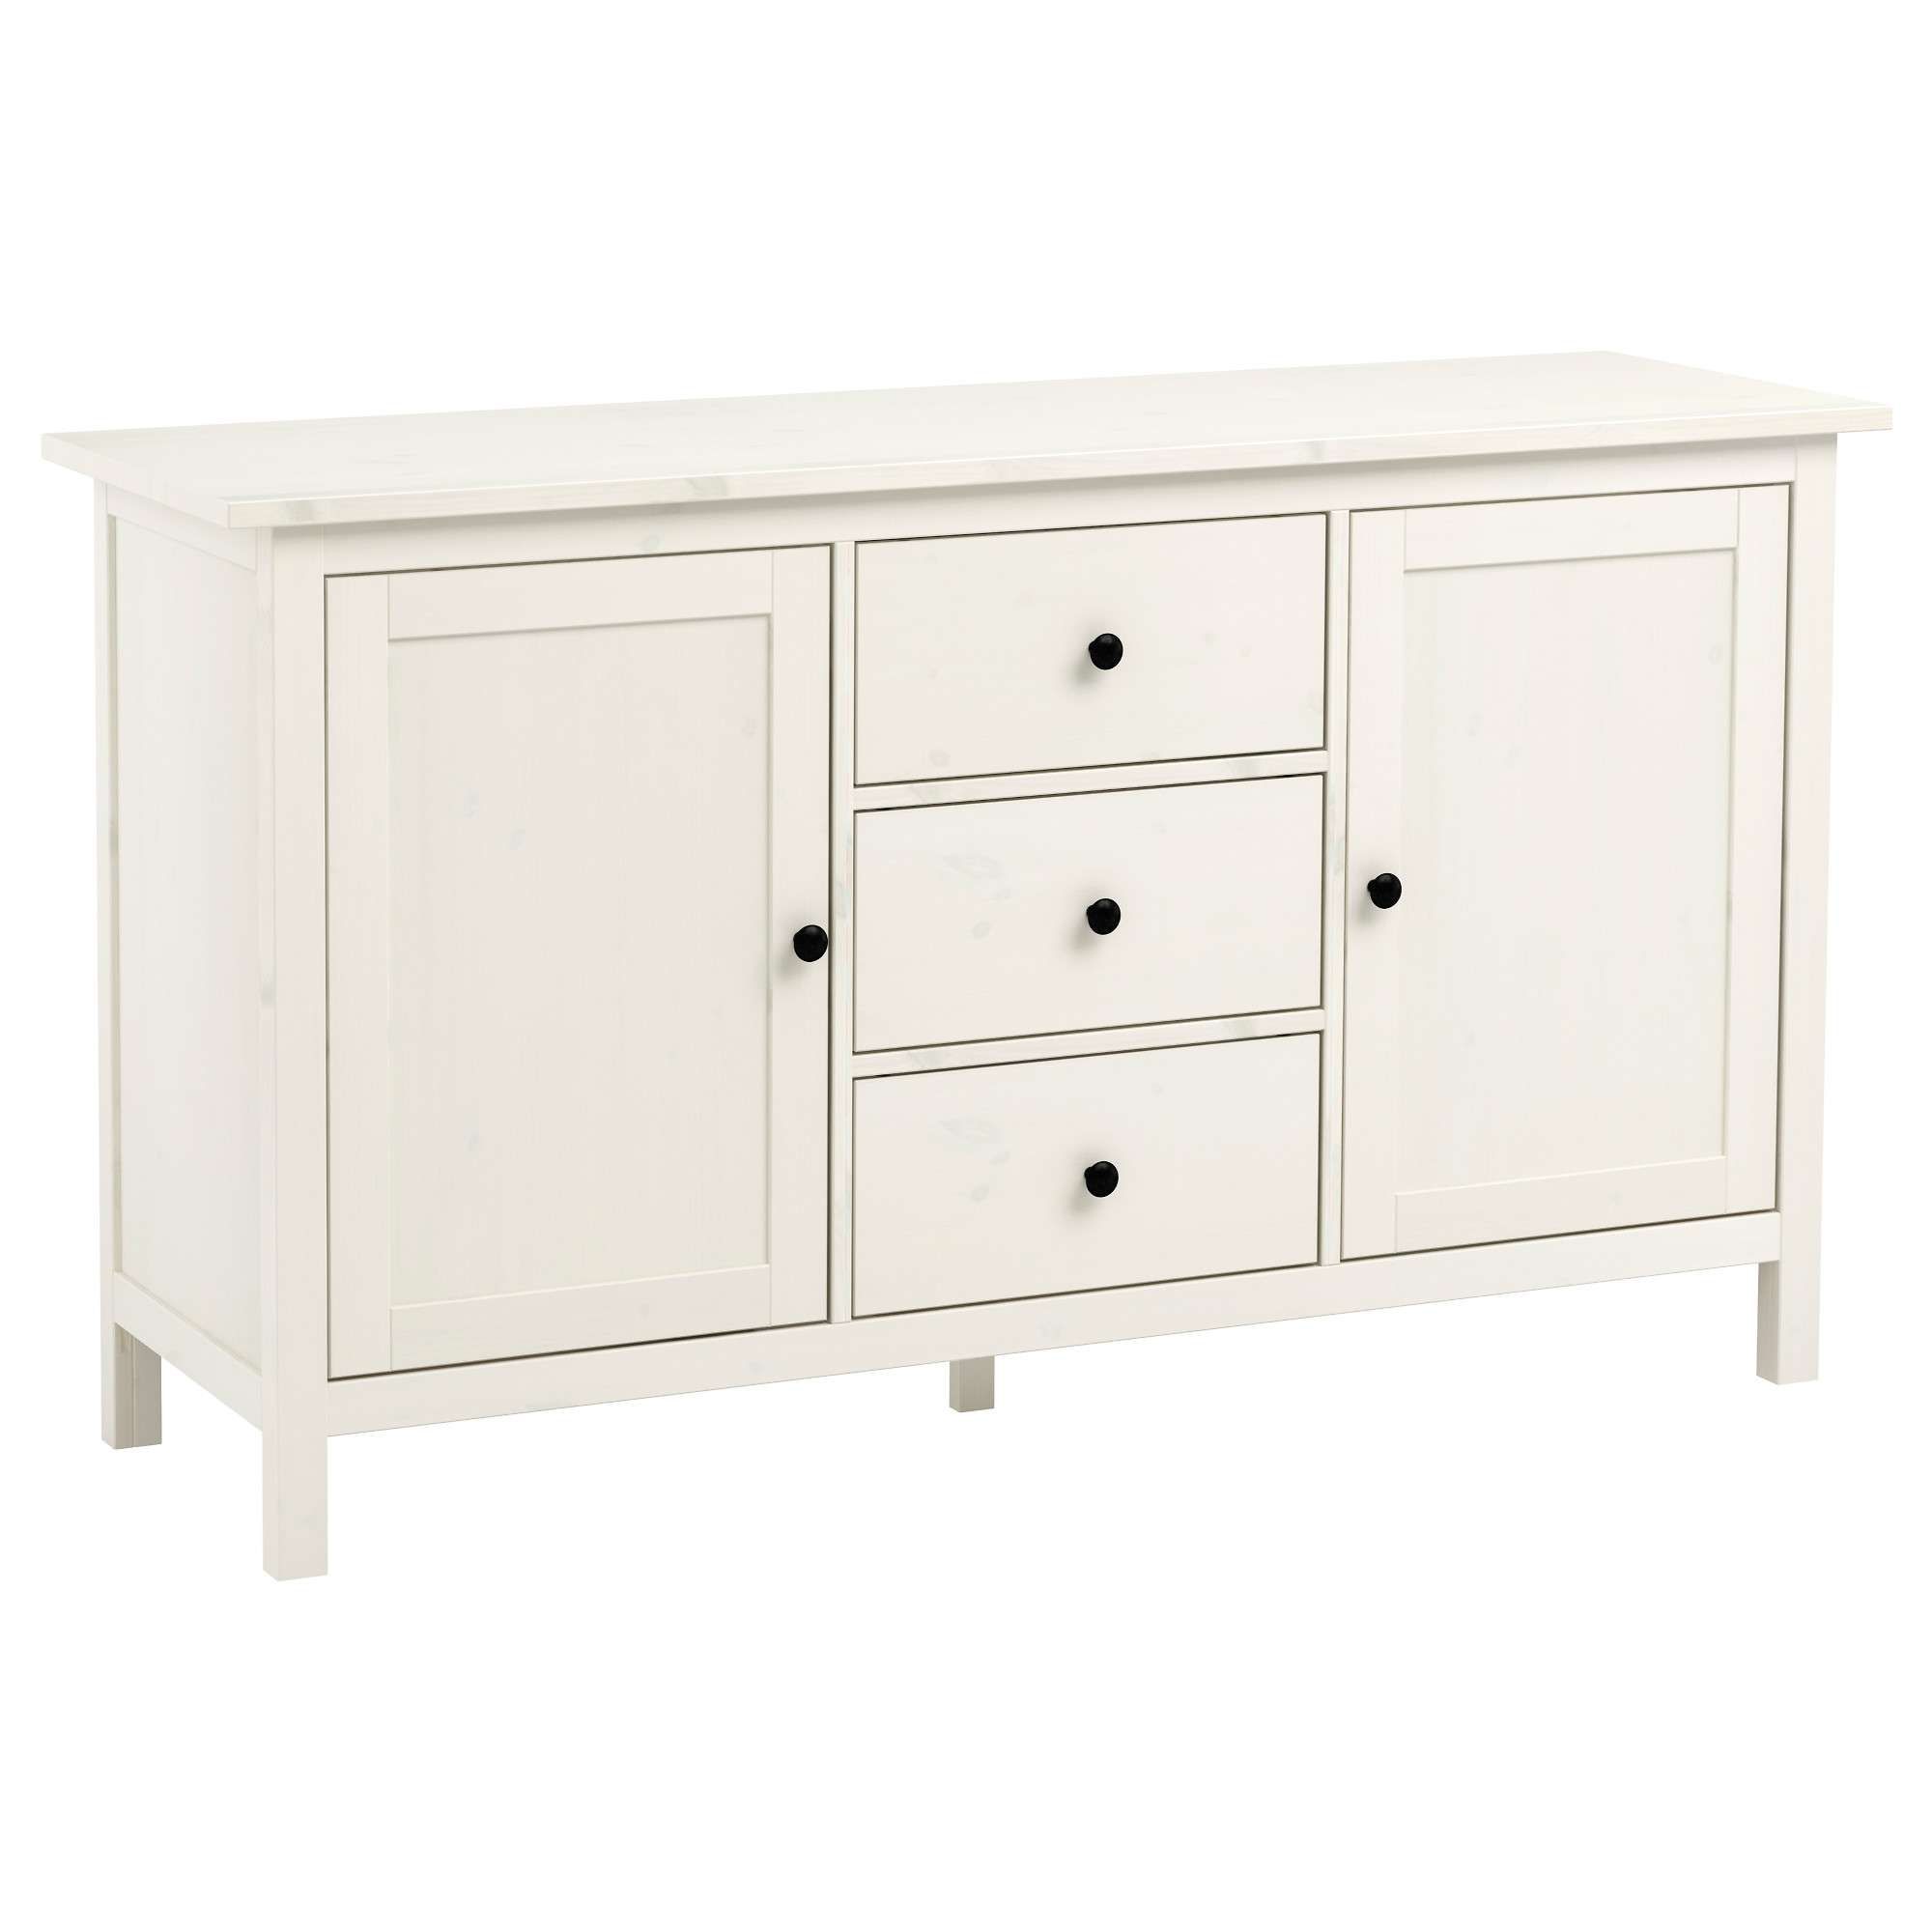 Hemnes Sideboard White Stain 157x88 Cm – Ikea Inside Sideboards And Tables (View 3 of 20)